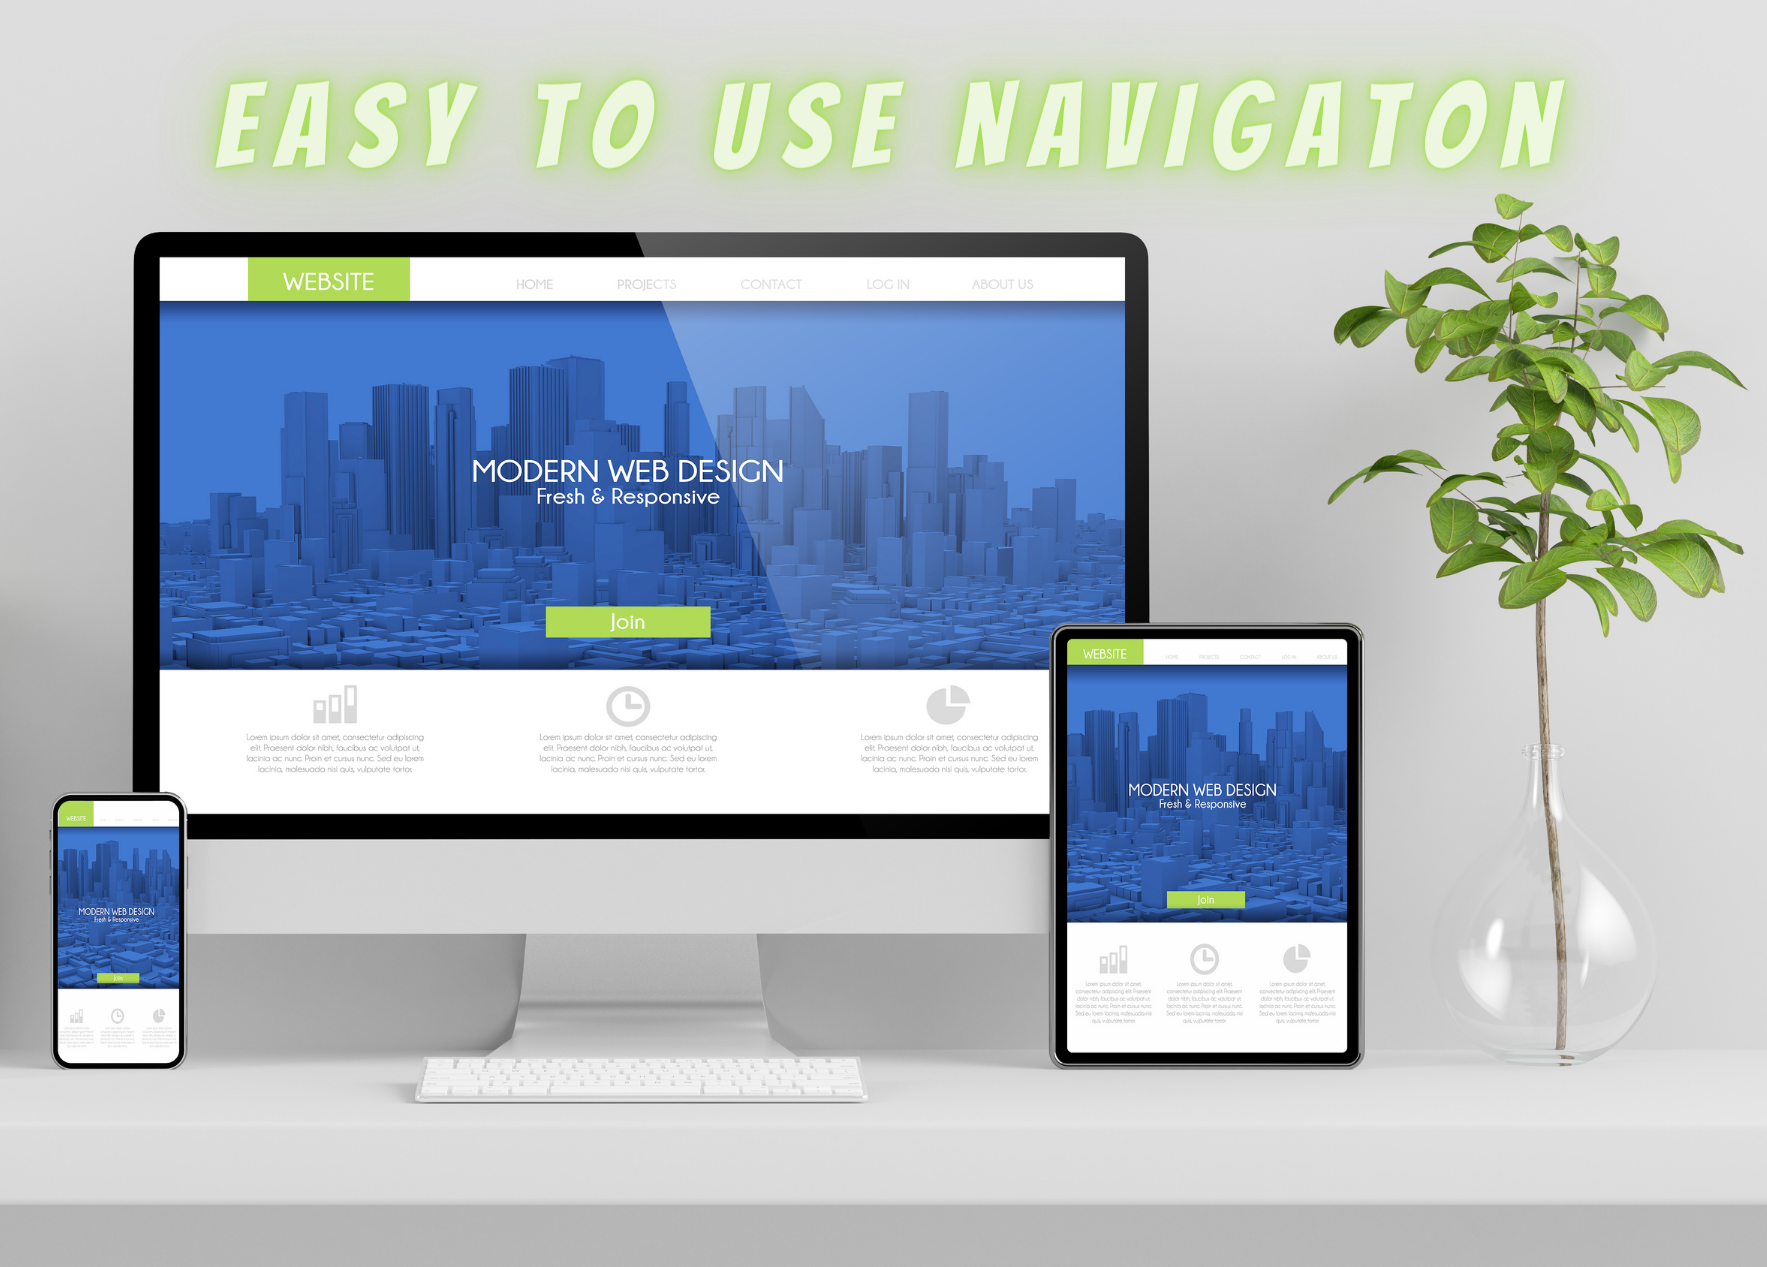 Make sure its easy to navigate your site!